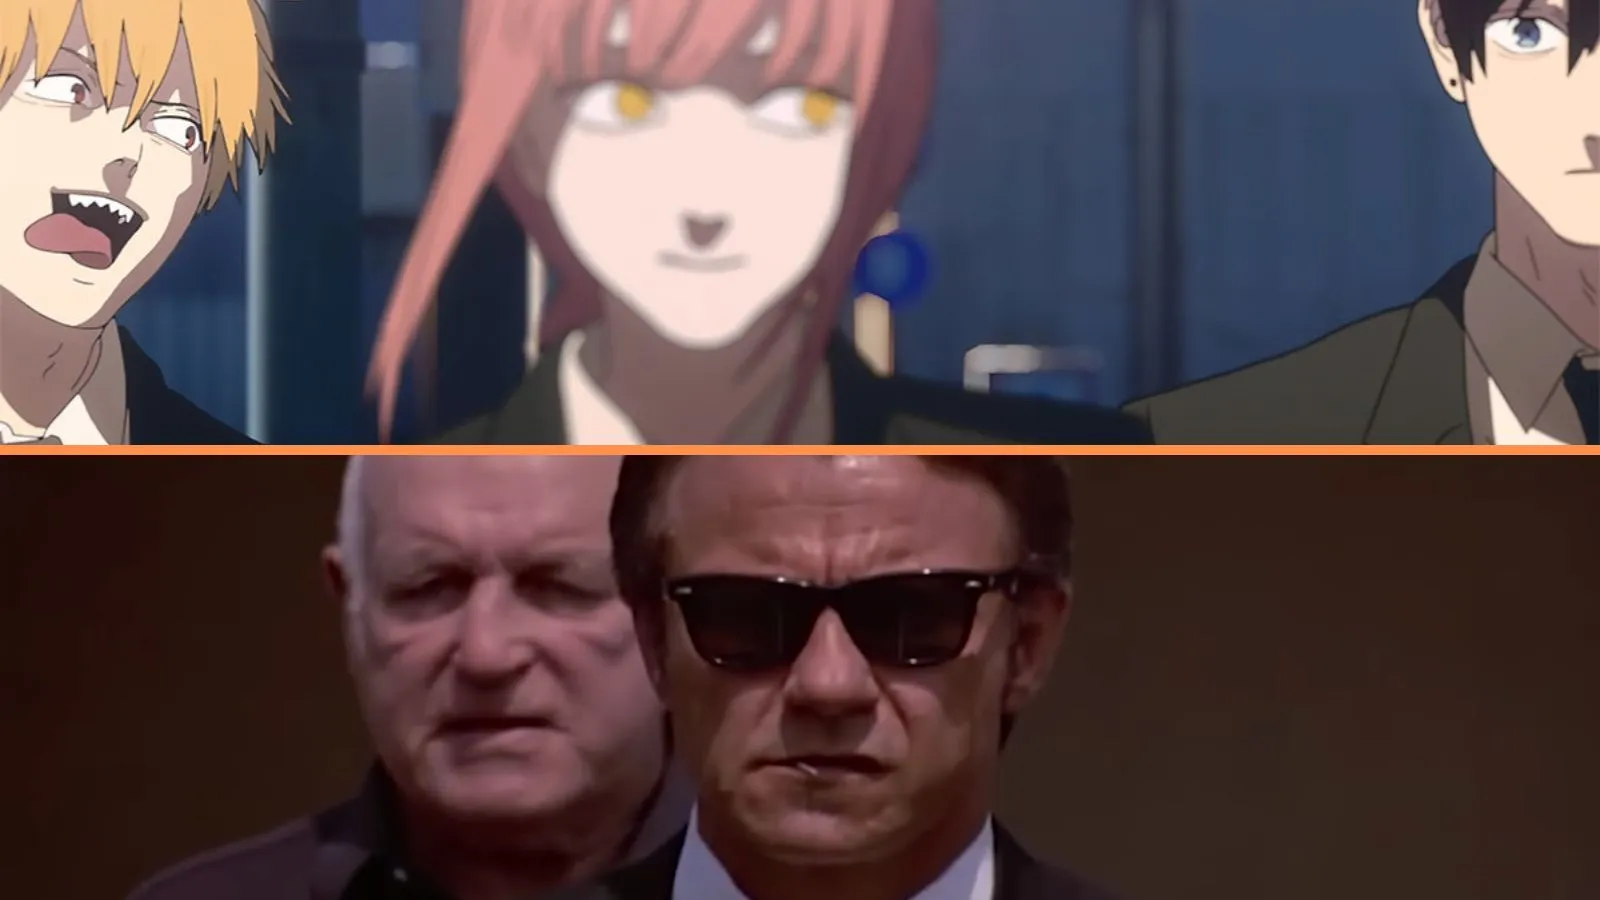 The Chainsaw Man and Reservoir Dogs comparison